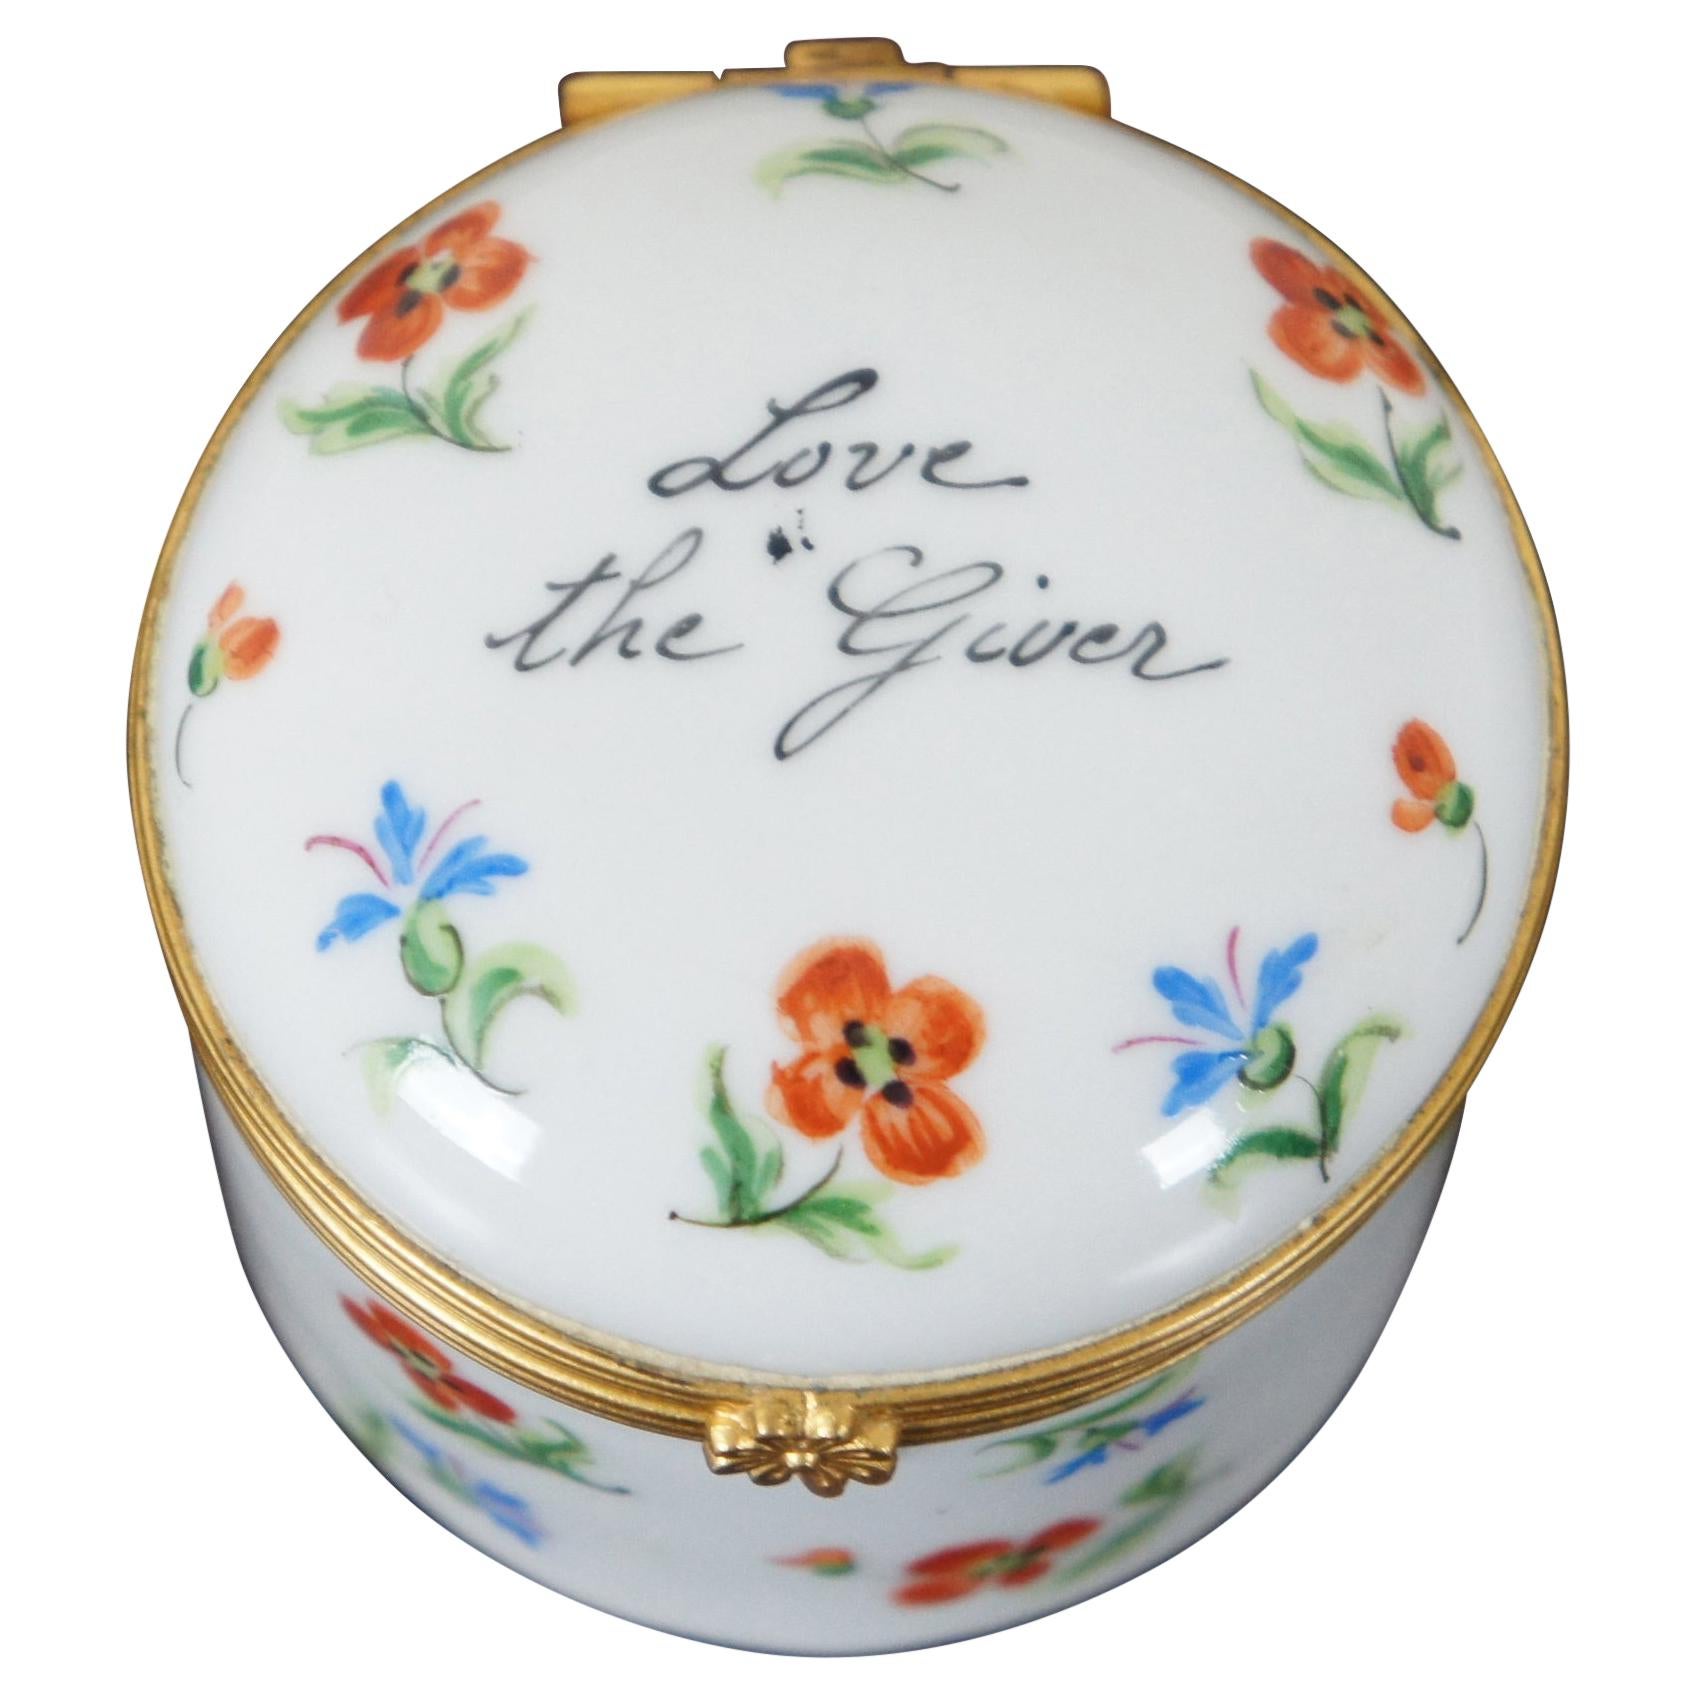 Tiffany & Co Private Stock Limoges France Trinket Box Love the Giver Keepsake